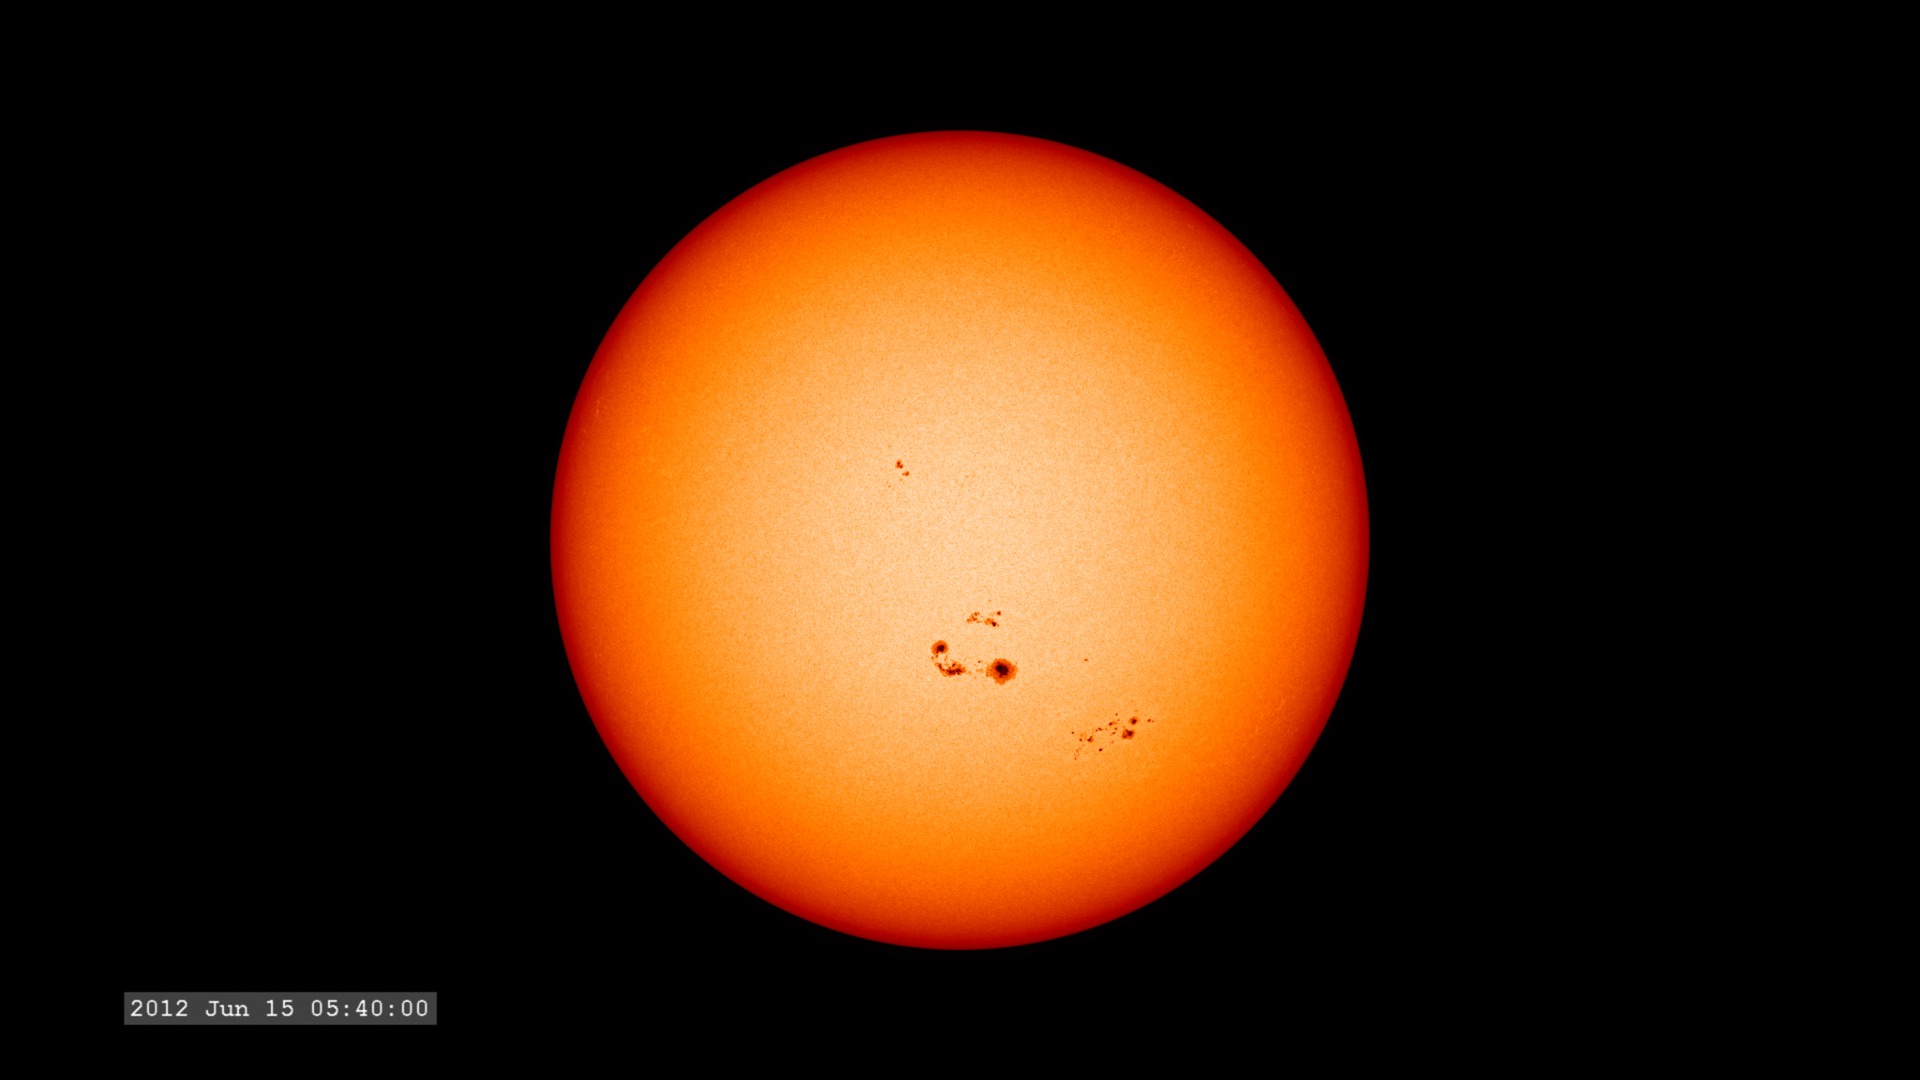 An HD movie of the sunspot evolution.